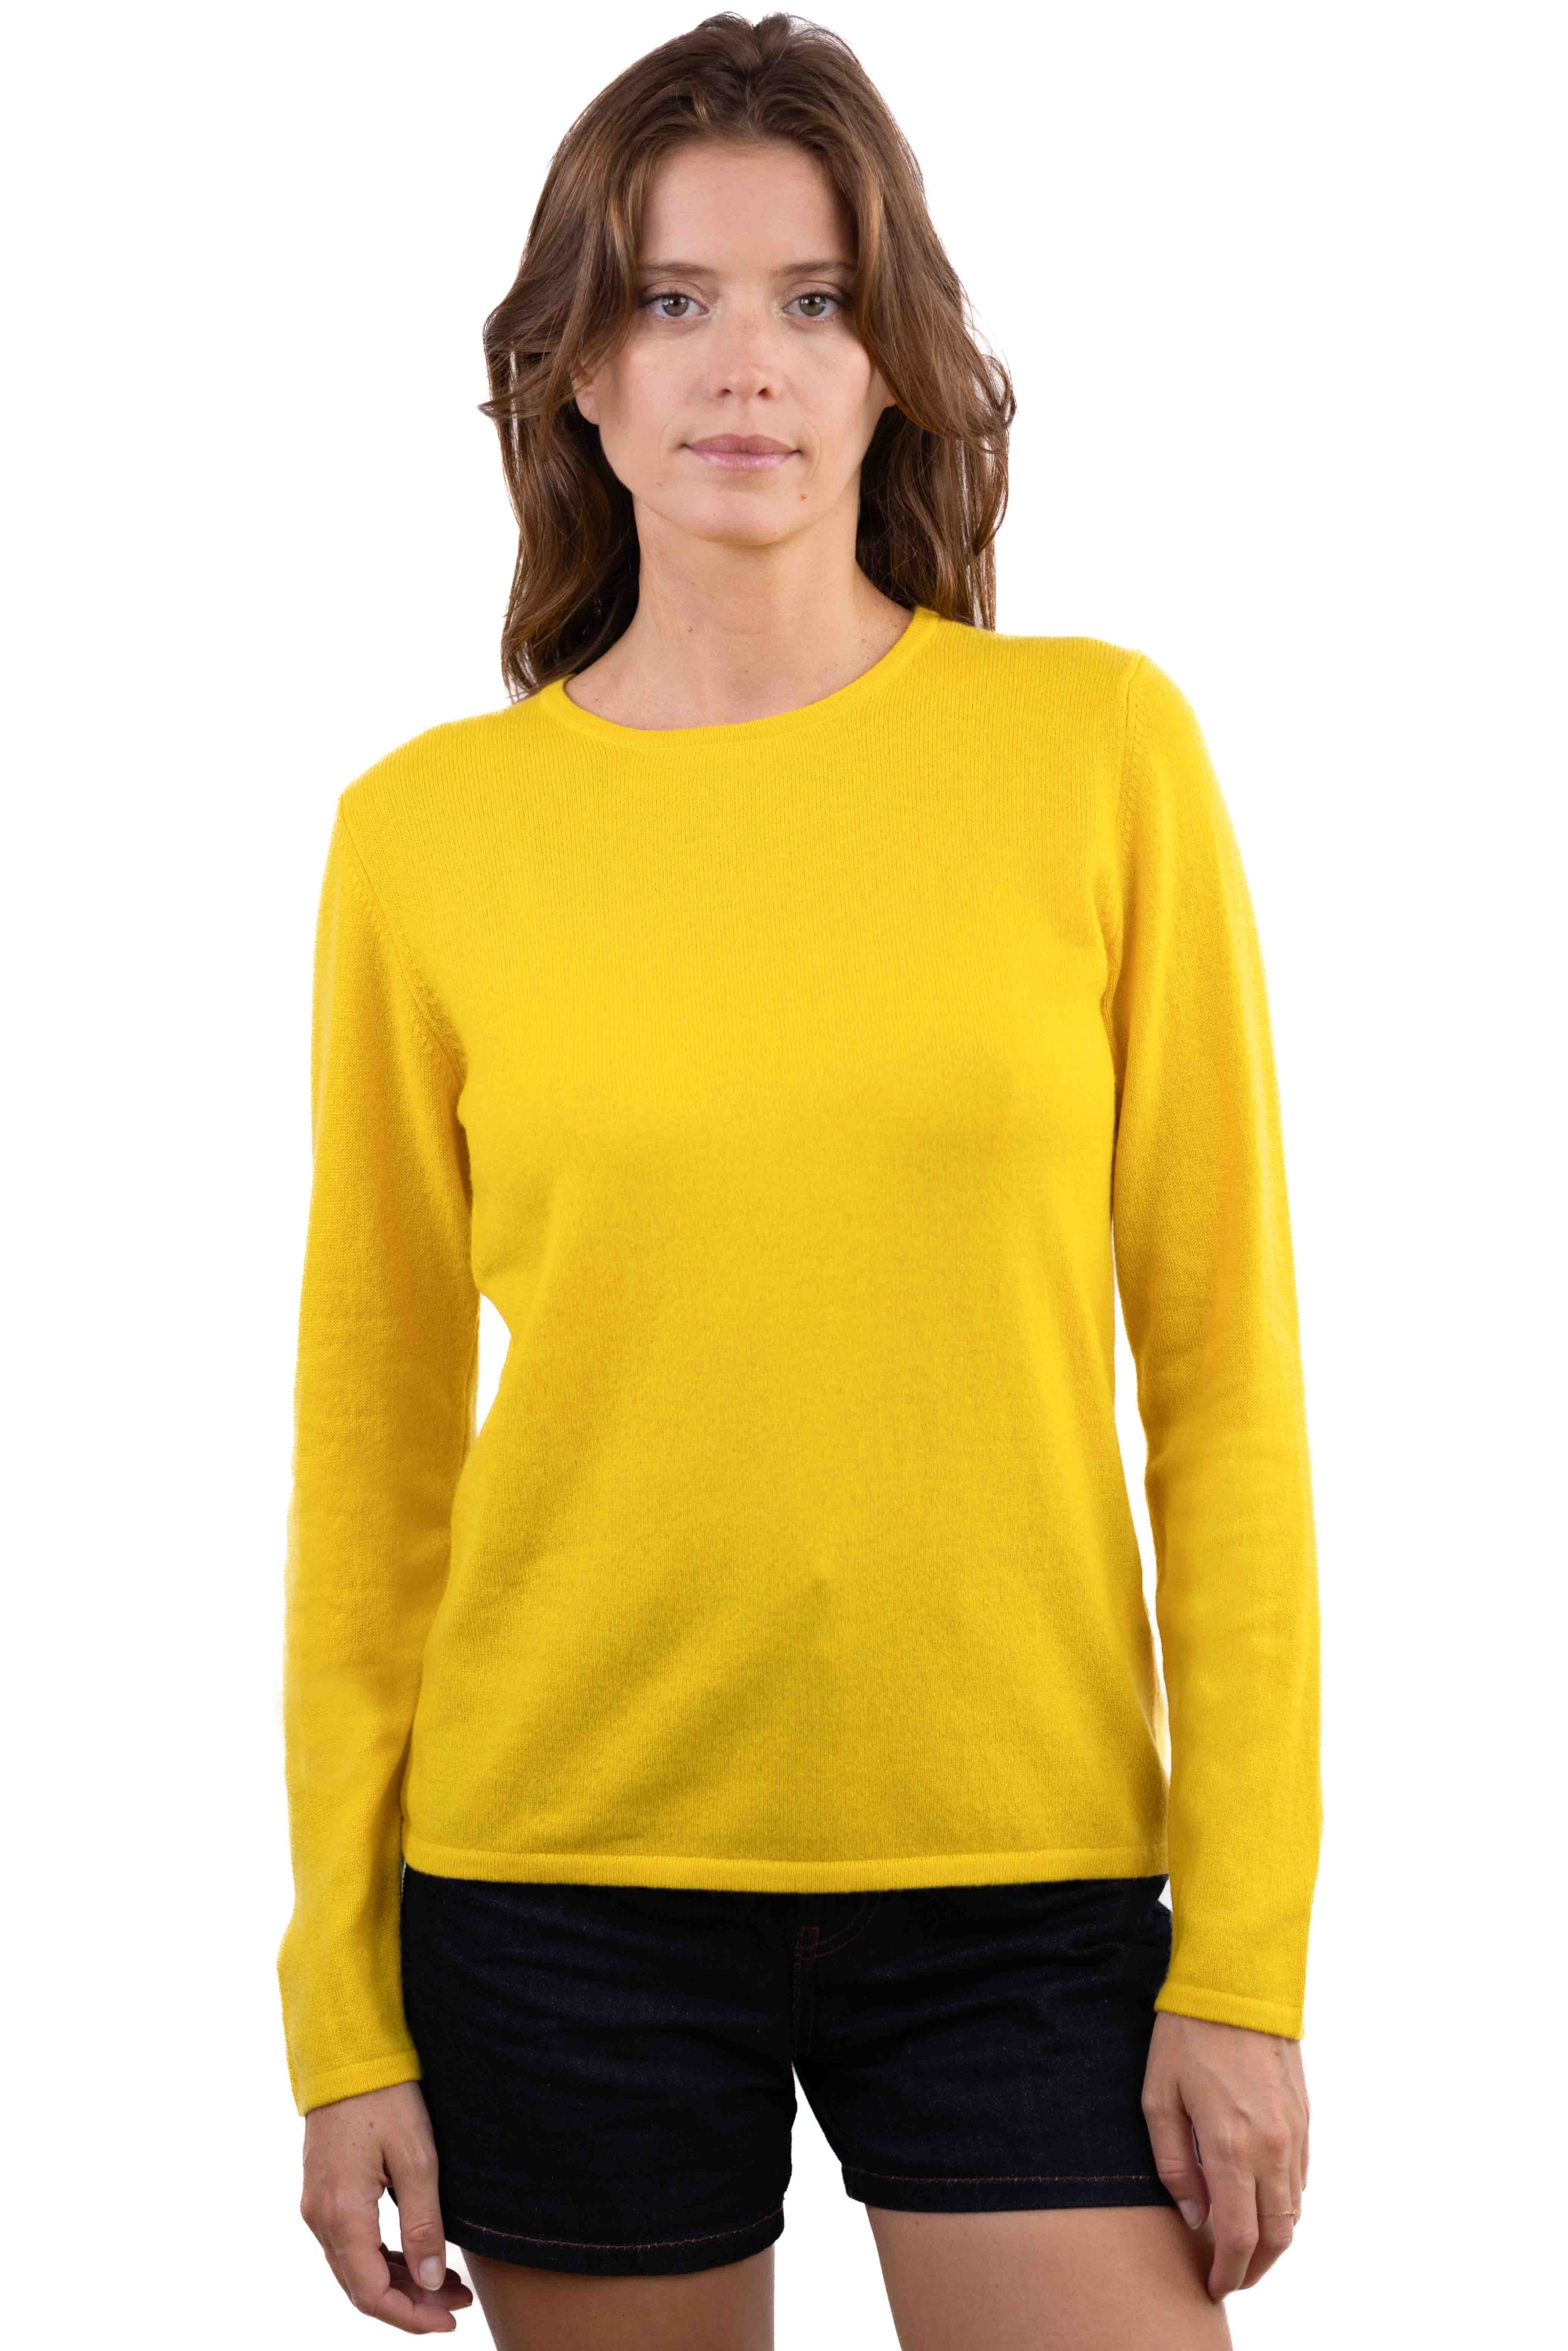 Cashmere ladies timeless classics line cyber yellow xs